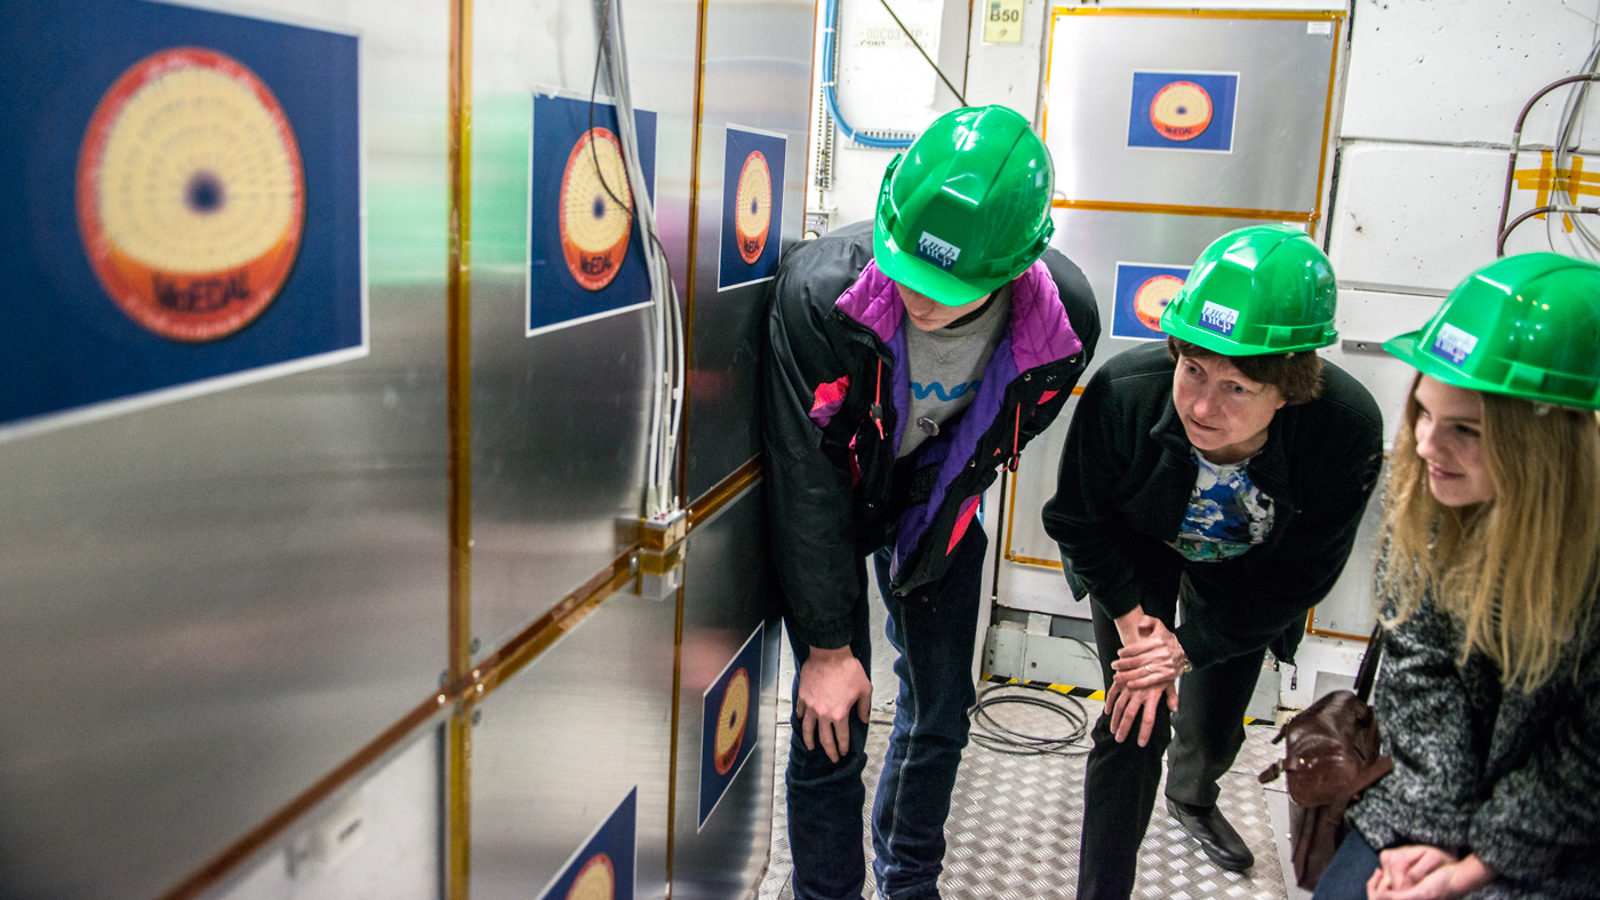 Students will help MoEDAL experiment at CERN seek evidence of magnetic monopoles, microscopic black holes and other phenomena